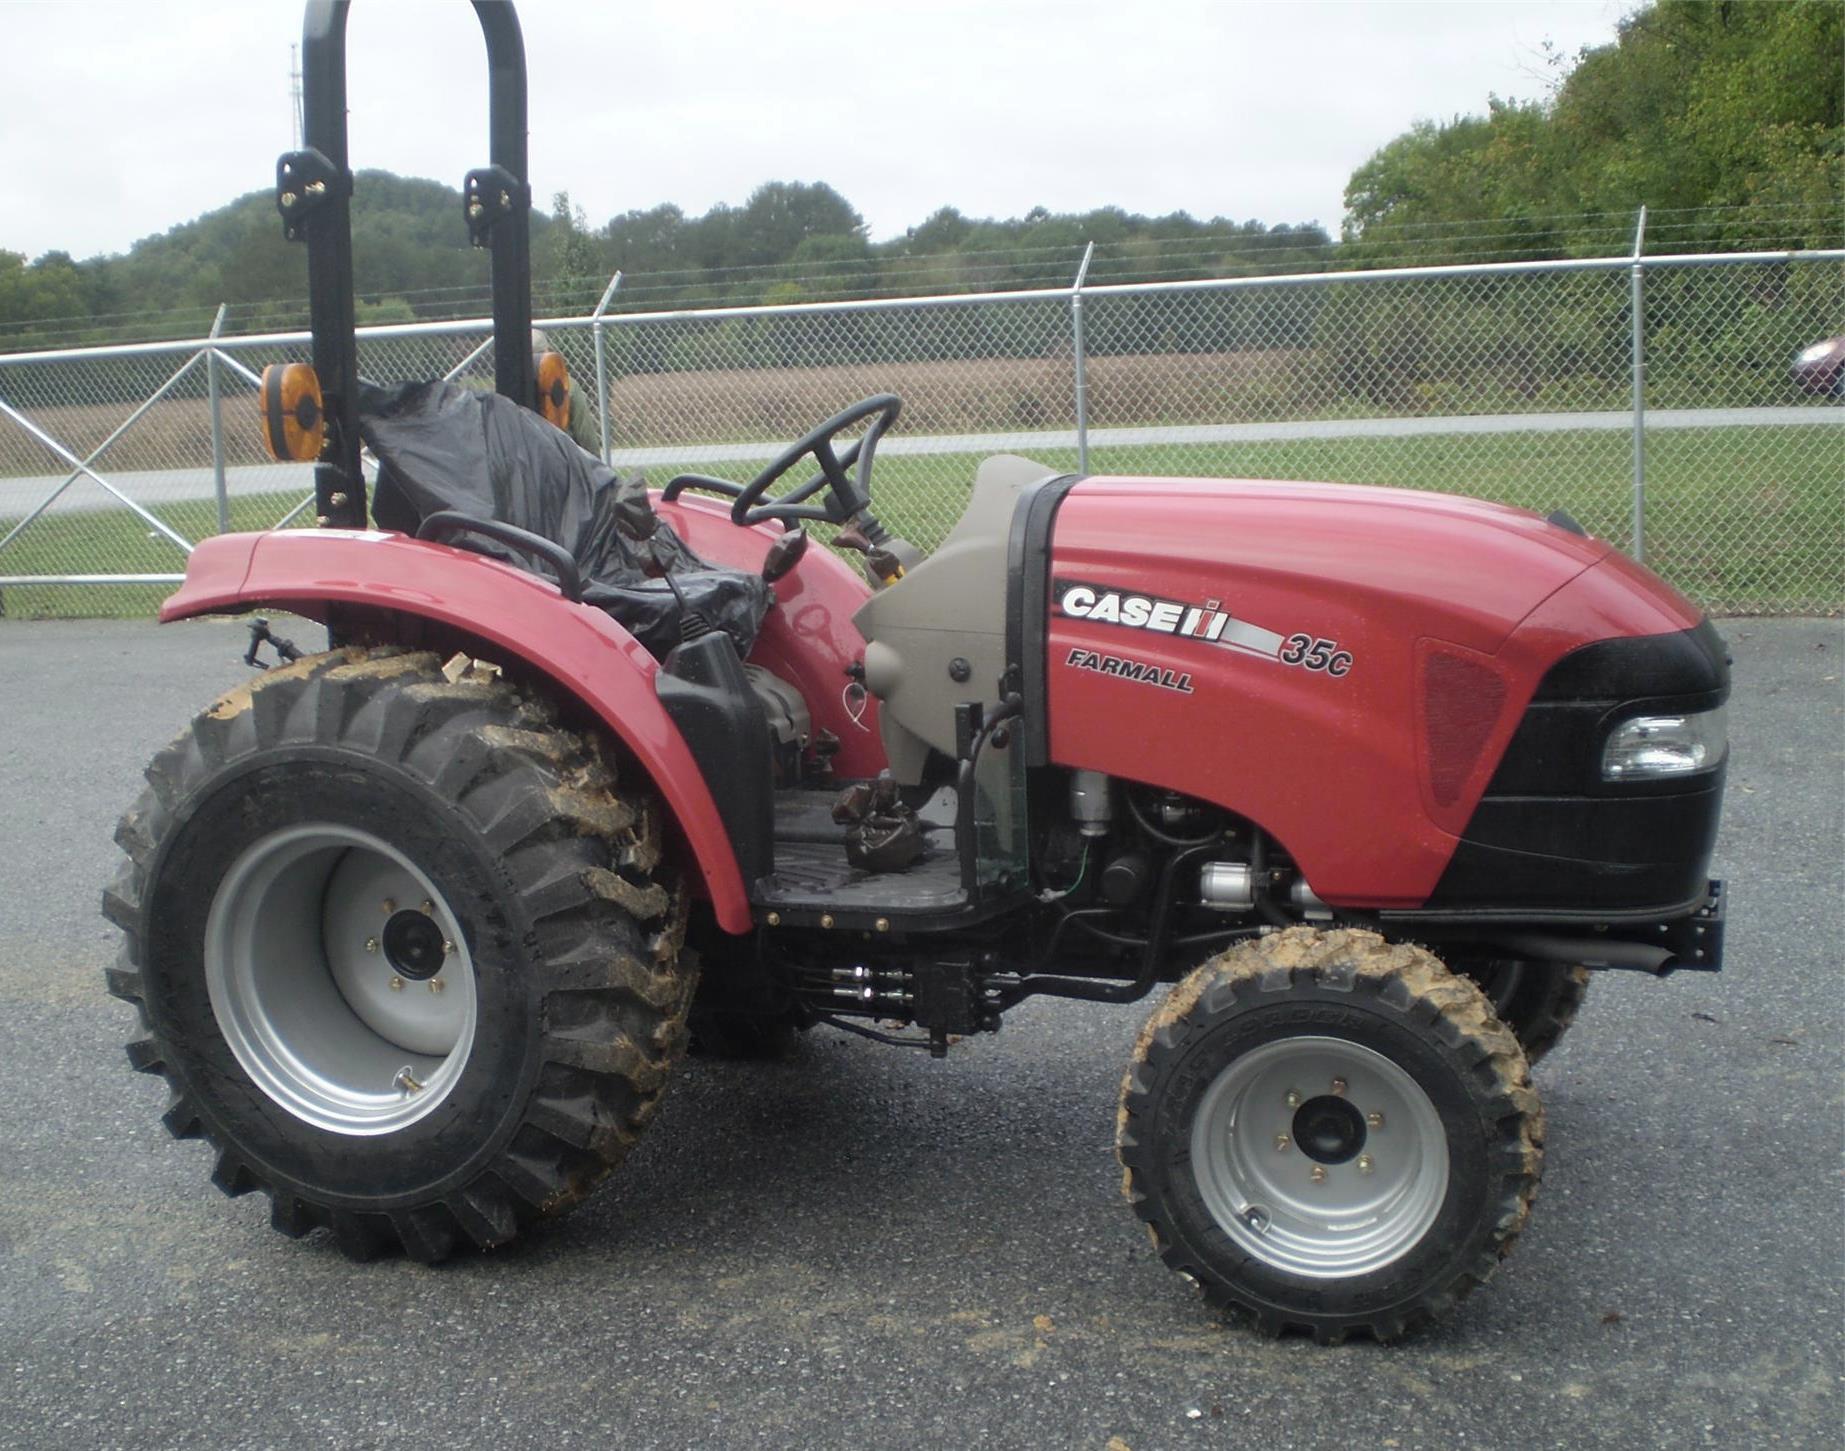 Classification - Compact Utility tractor